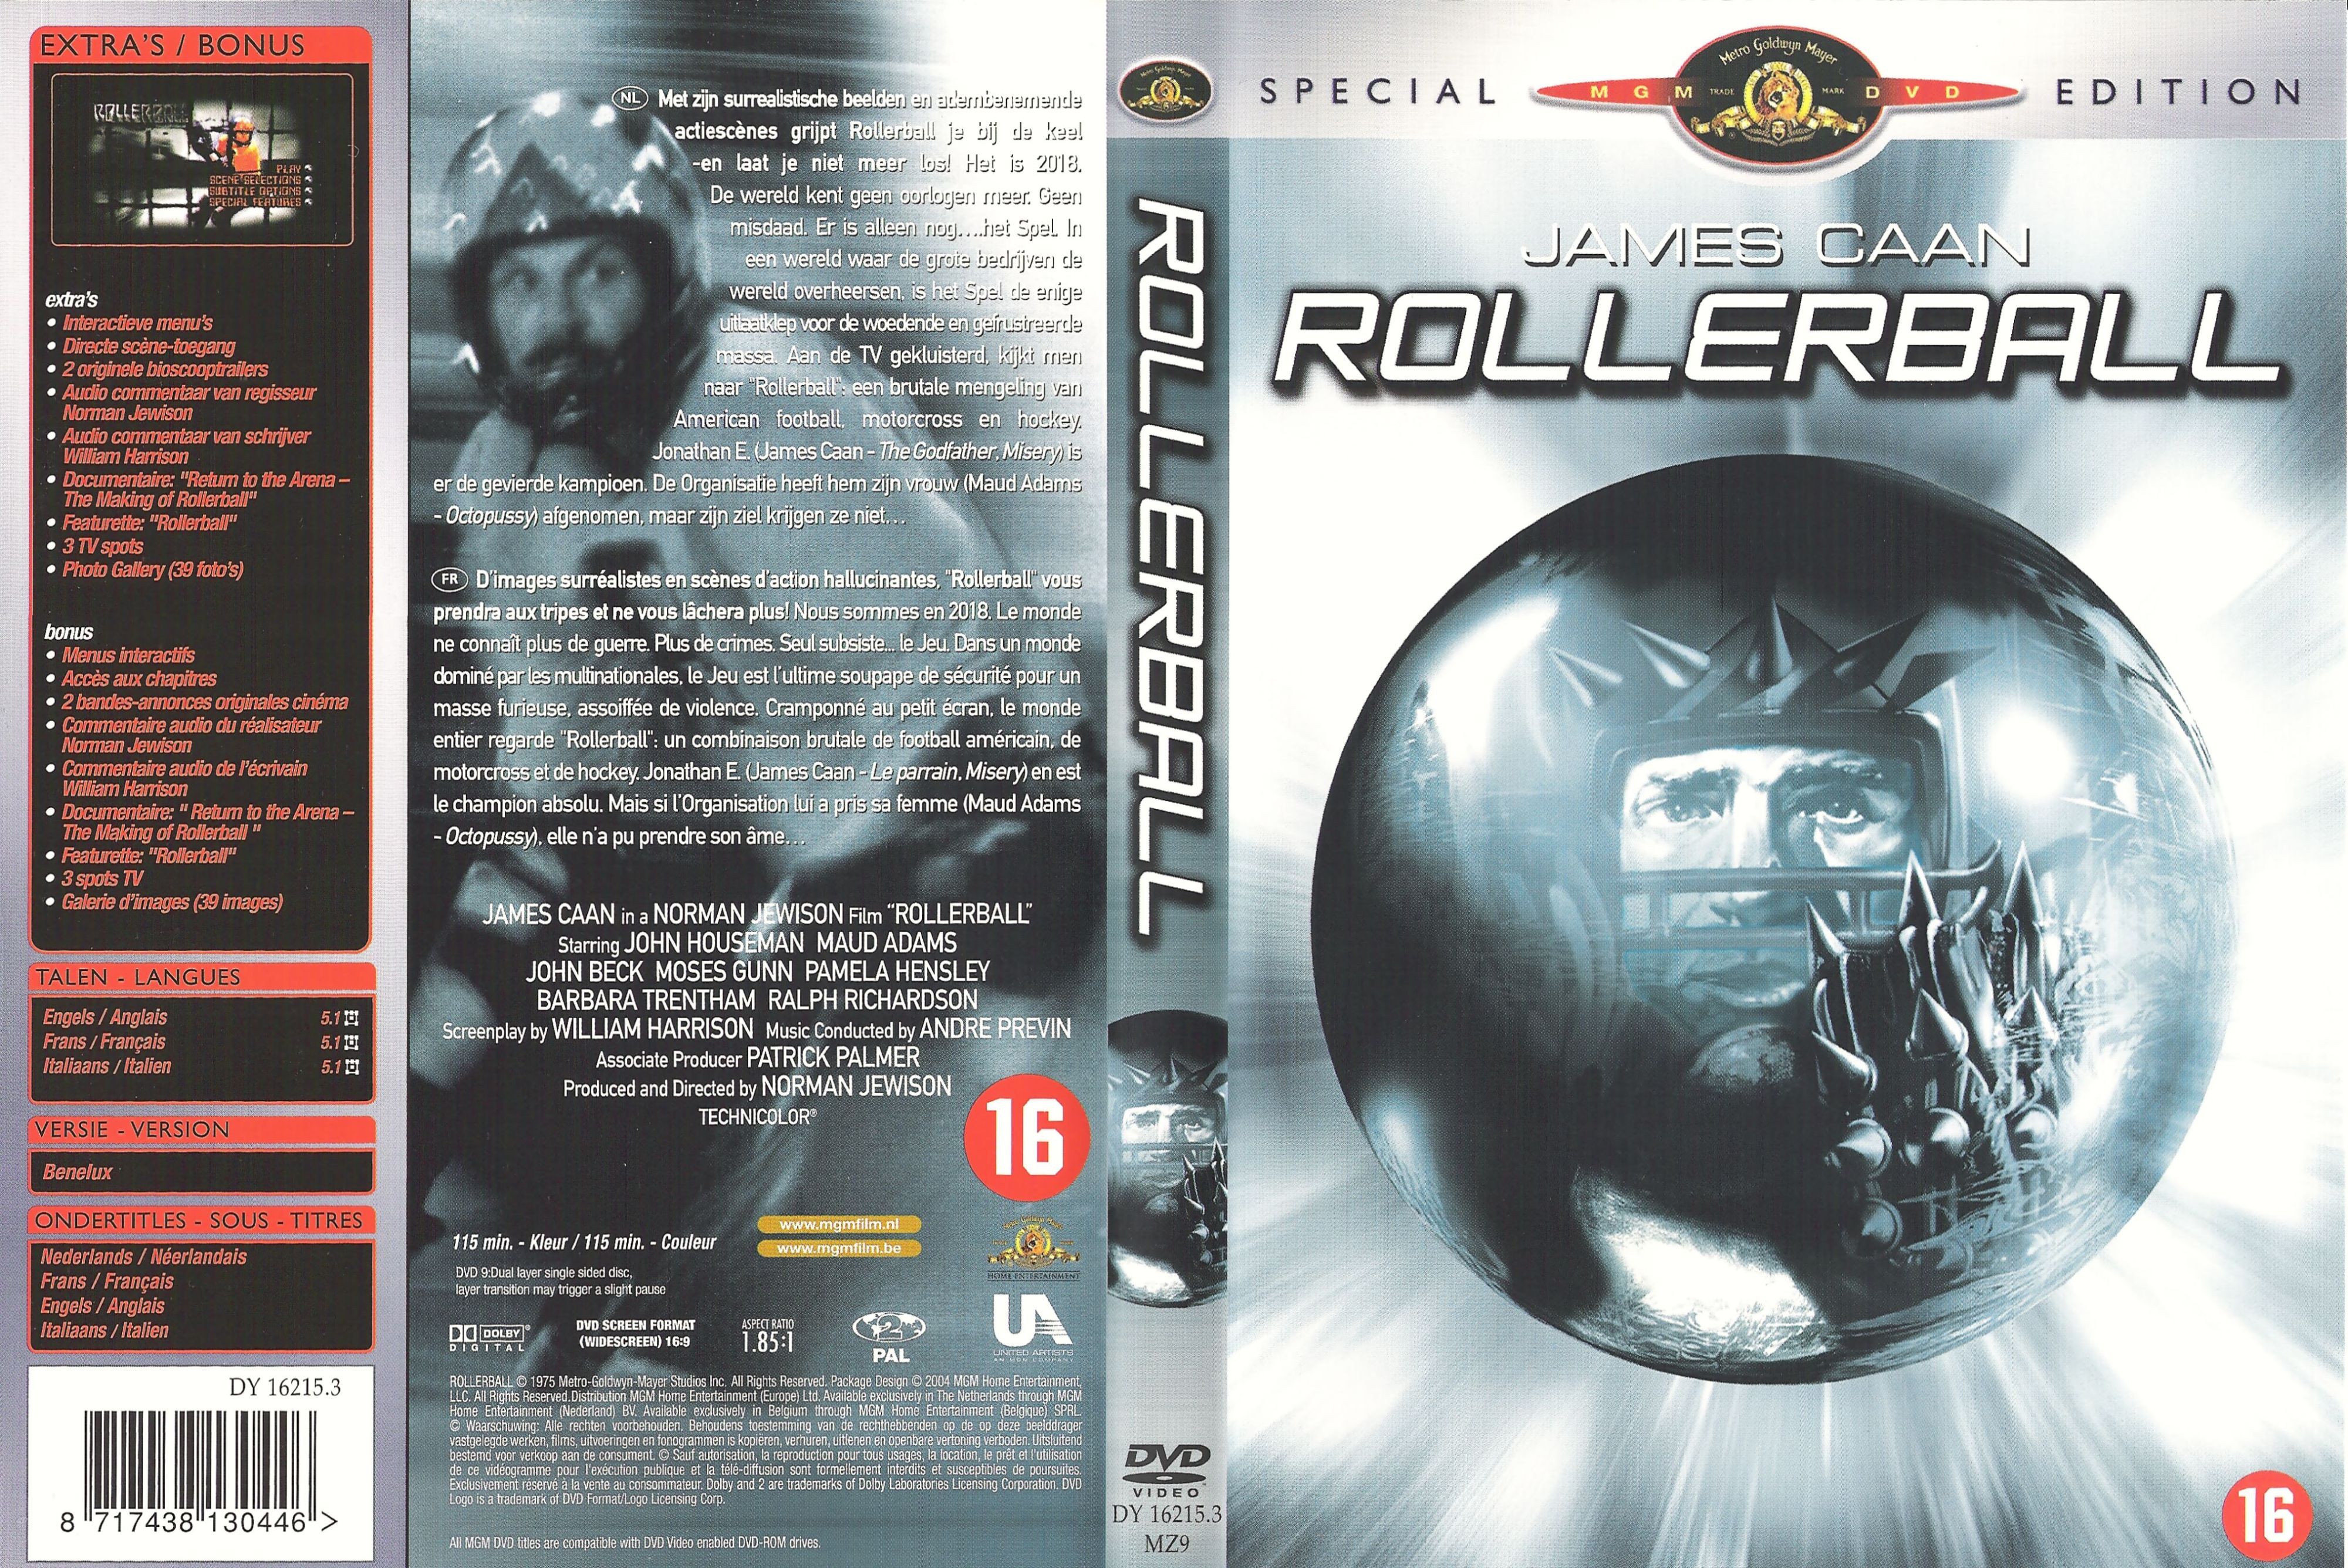 Jaquette DVD Rollerball v2